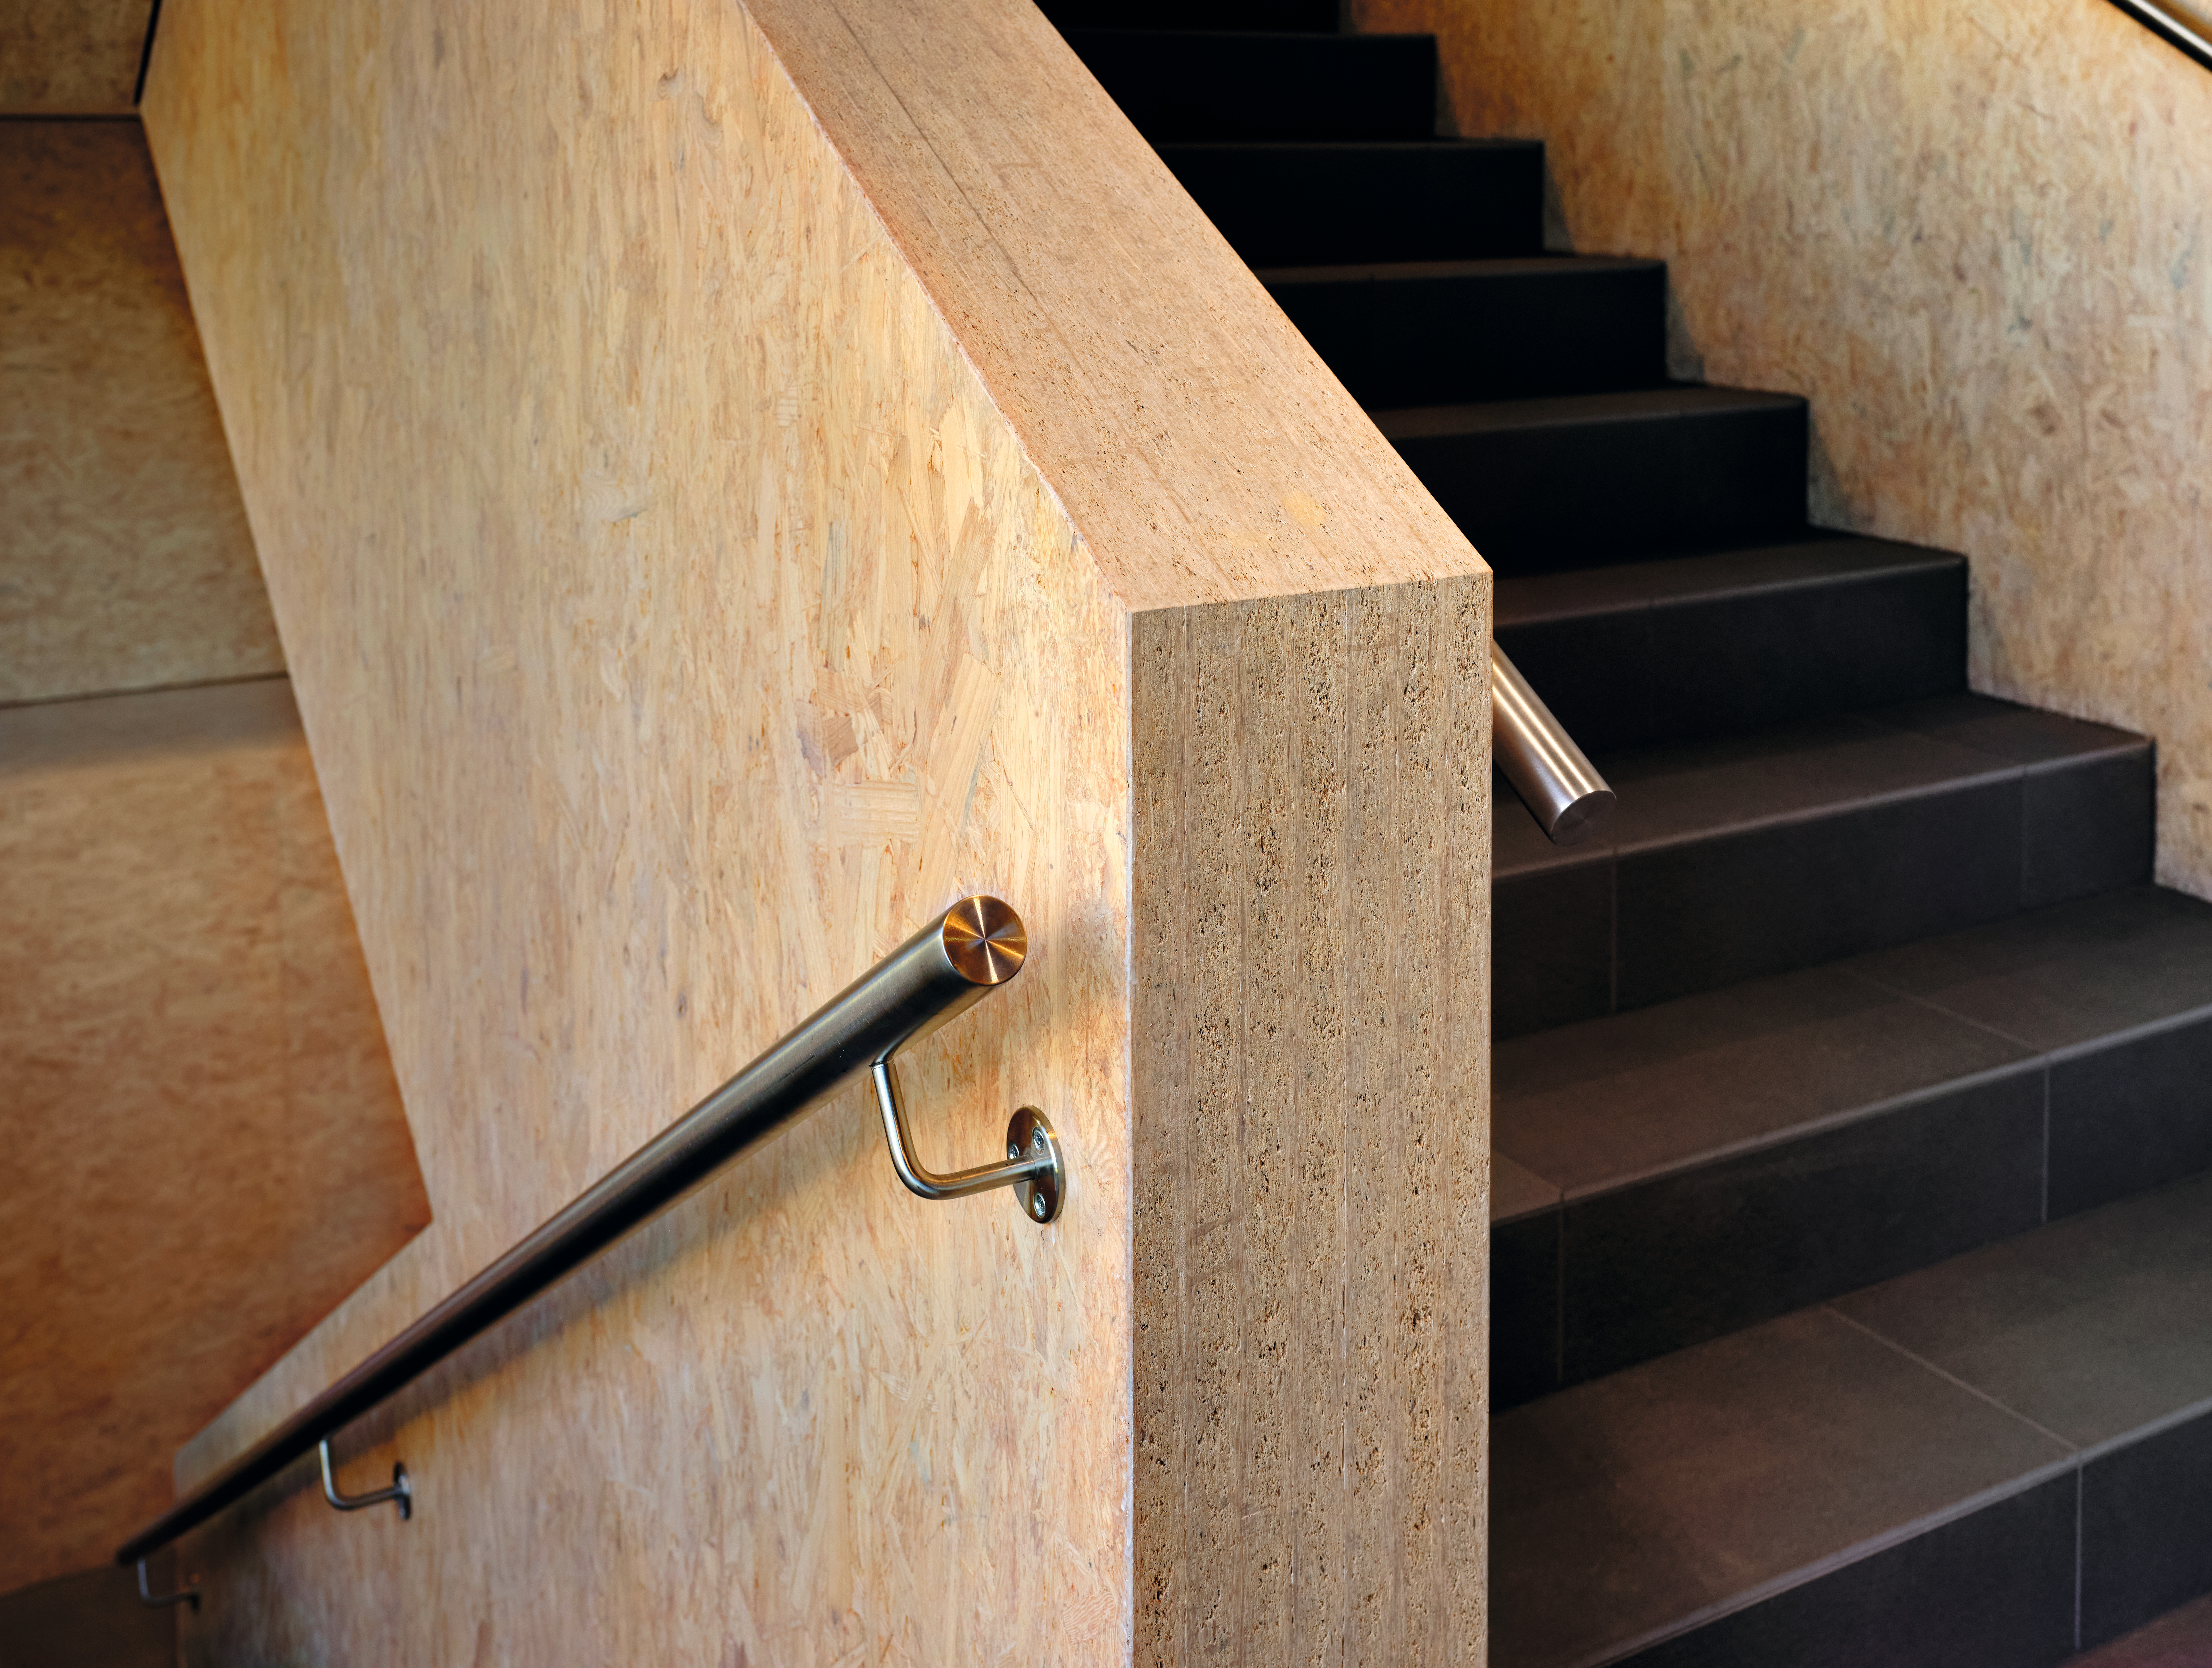 Glued OSB boards form the high load-bearing stair stringer.